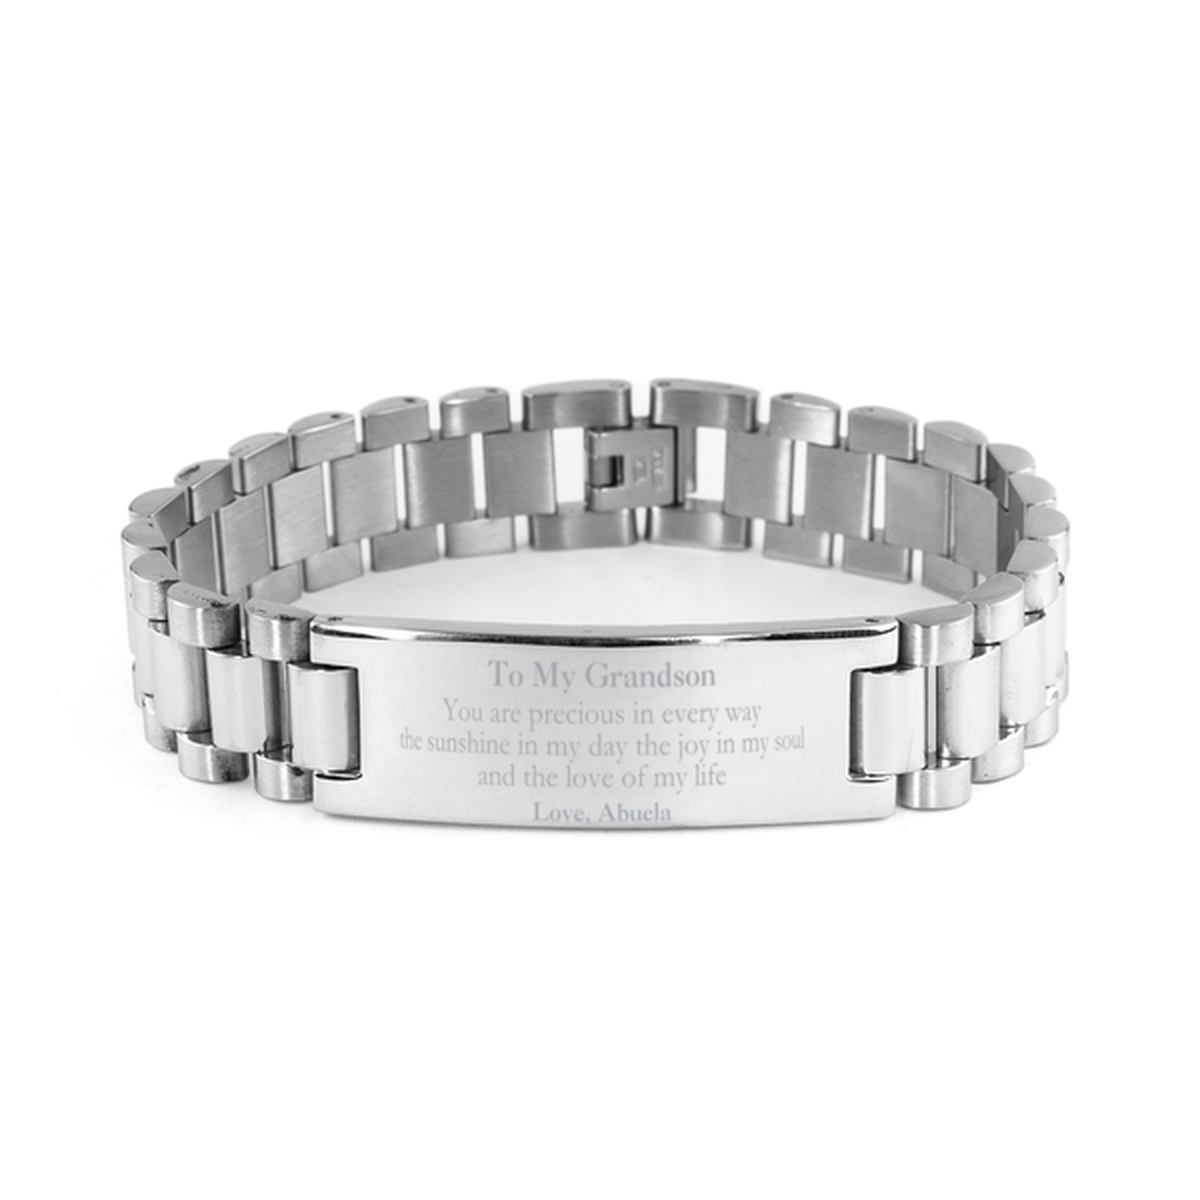 Graduation Gifts for Grandson Ladder Stainless Steel Bracelet Present from Abuela, Christmas Grandson Birthday Gifts Grandson You are precious in every way the sunshine in my day. Love, Abuela